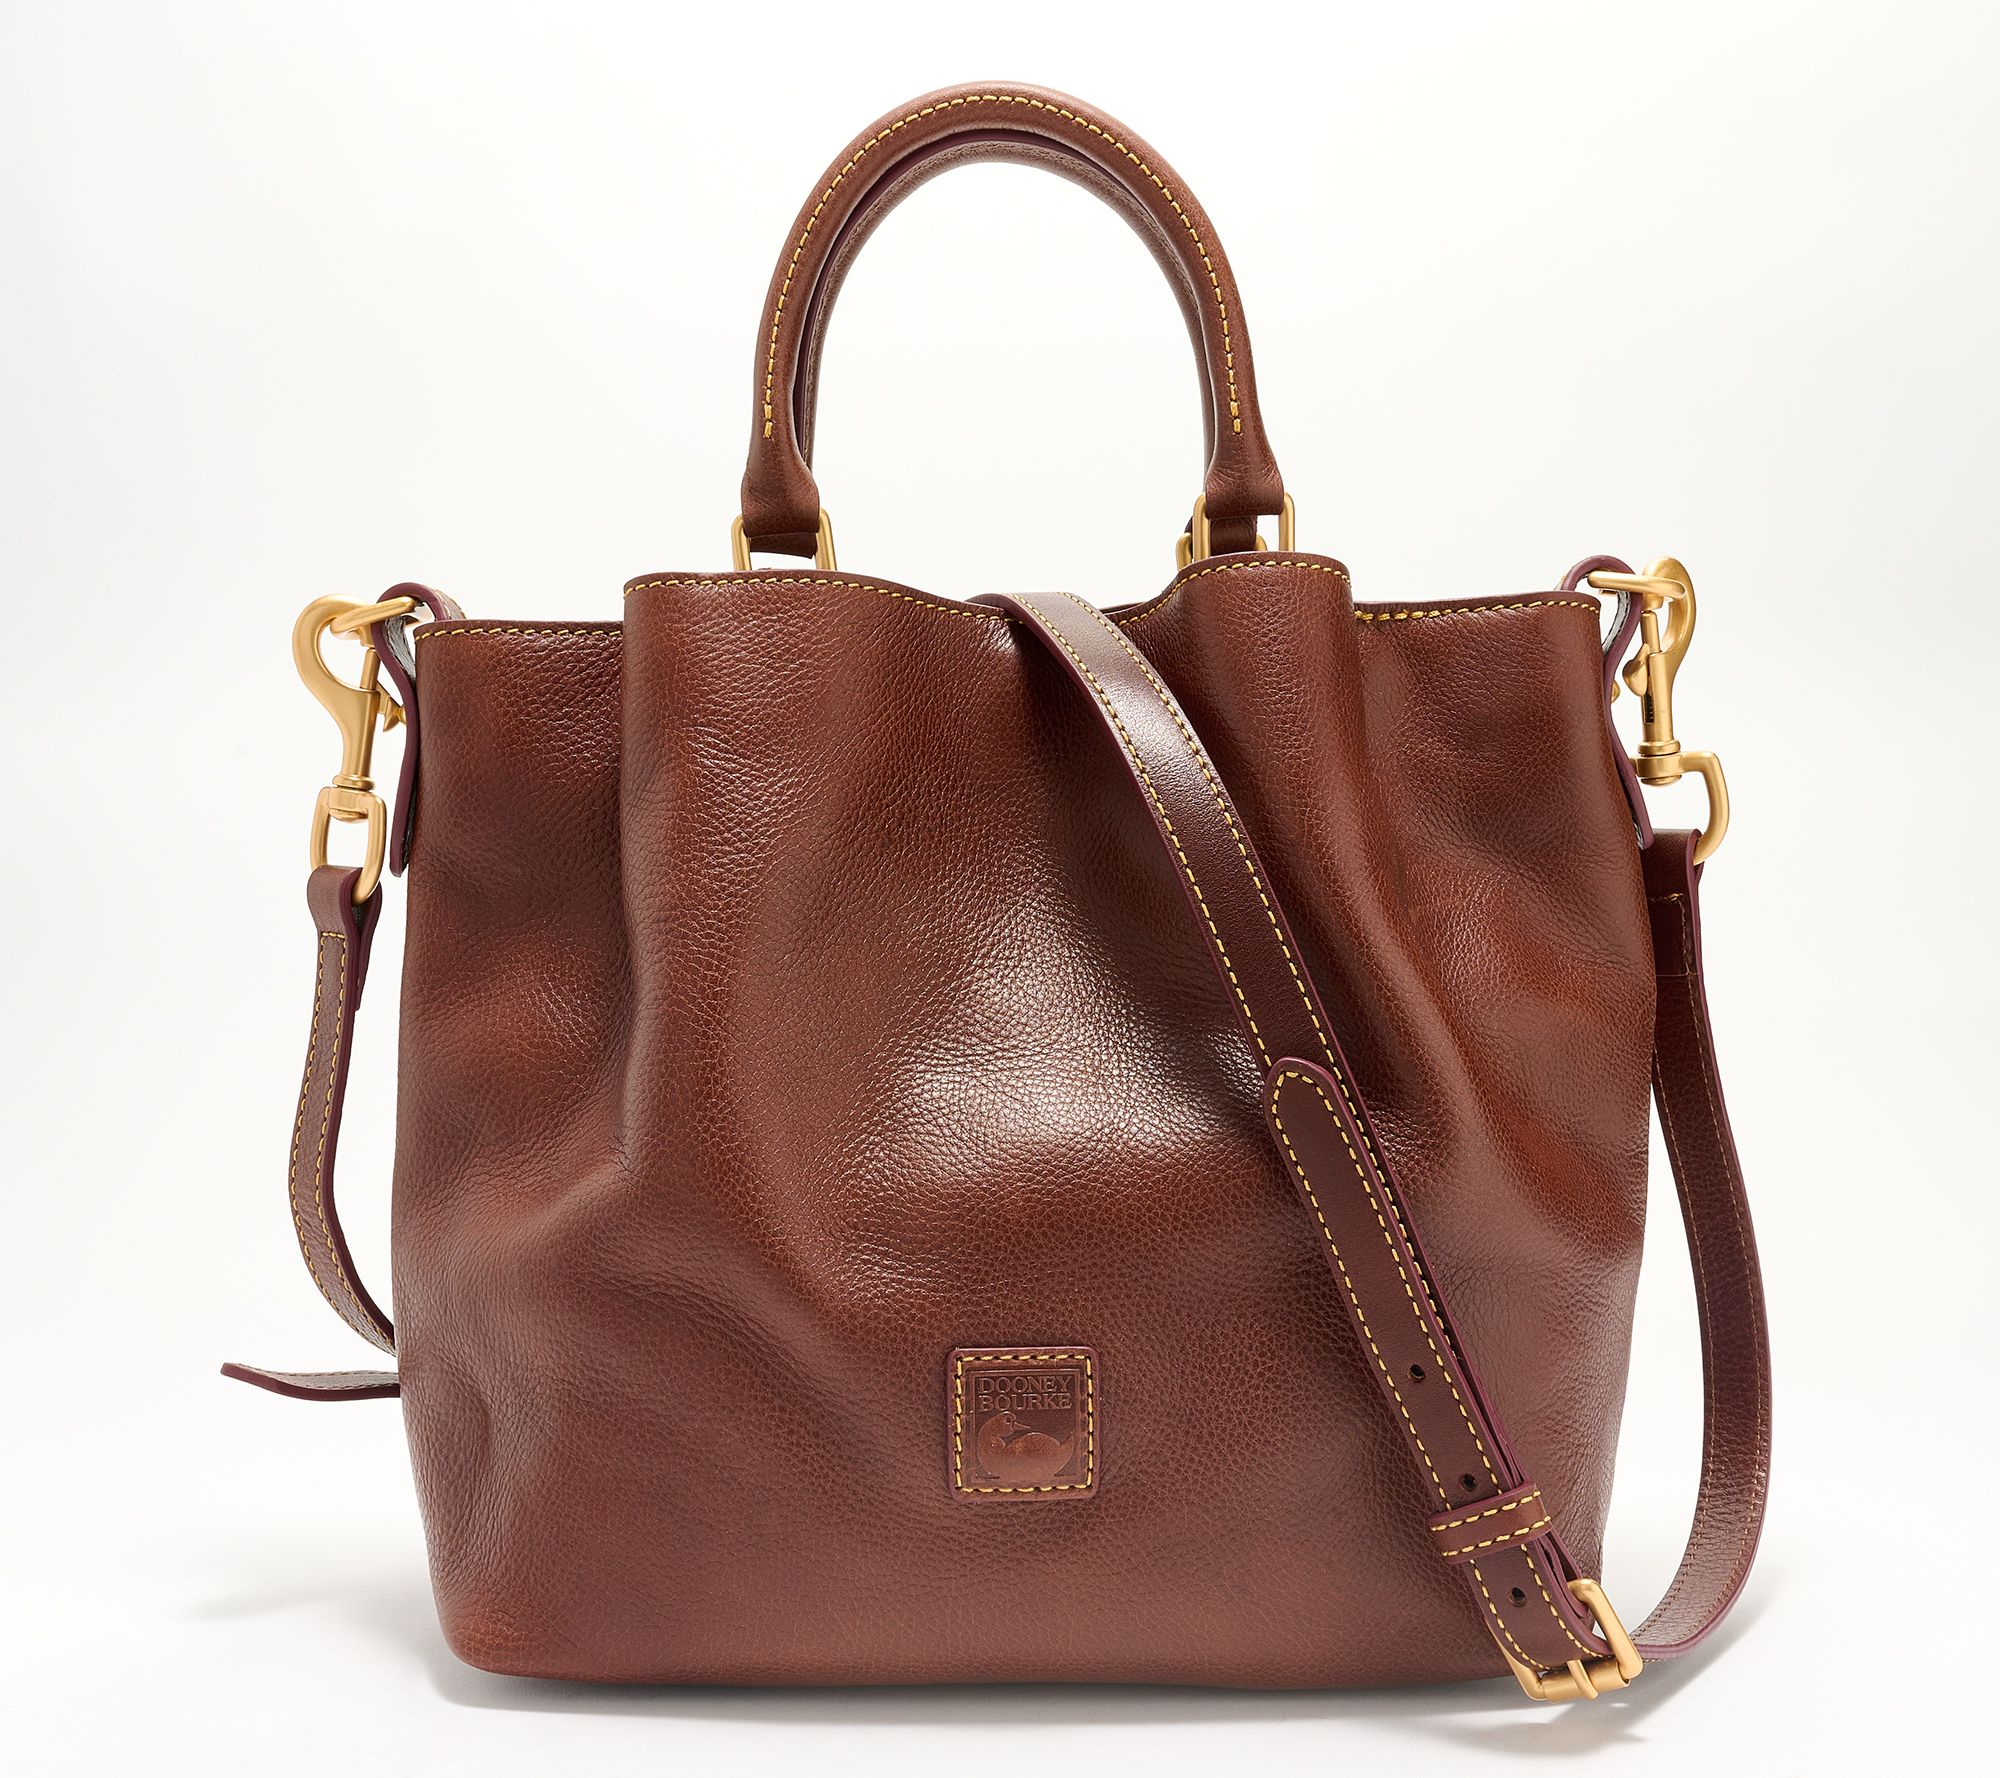 Dooney & Bourke Emerson Leather Small Tote Handbag- Shannon on QVC